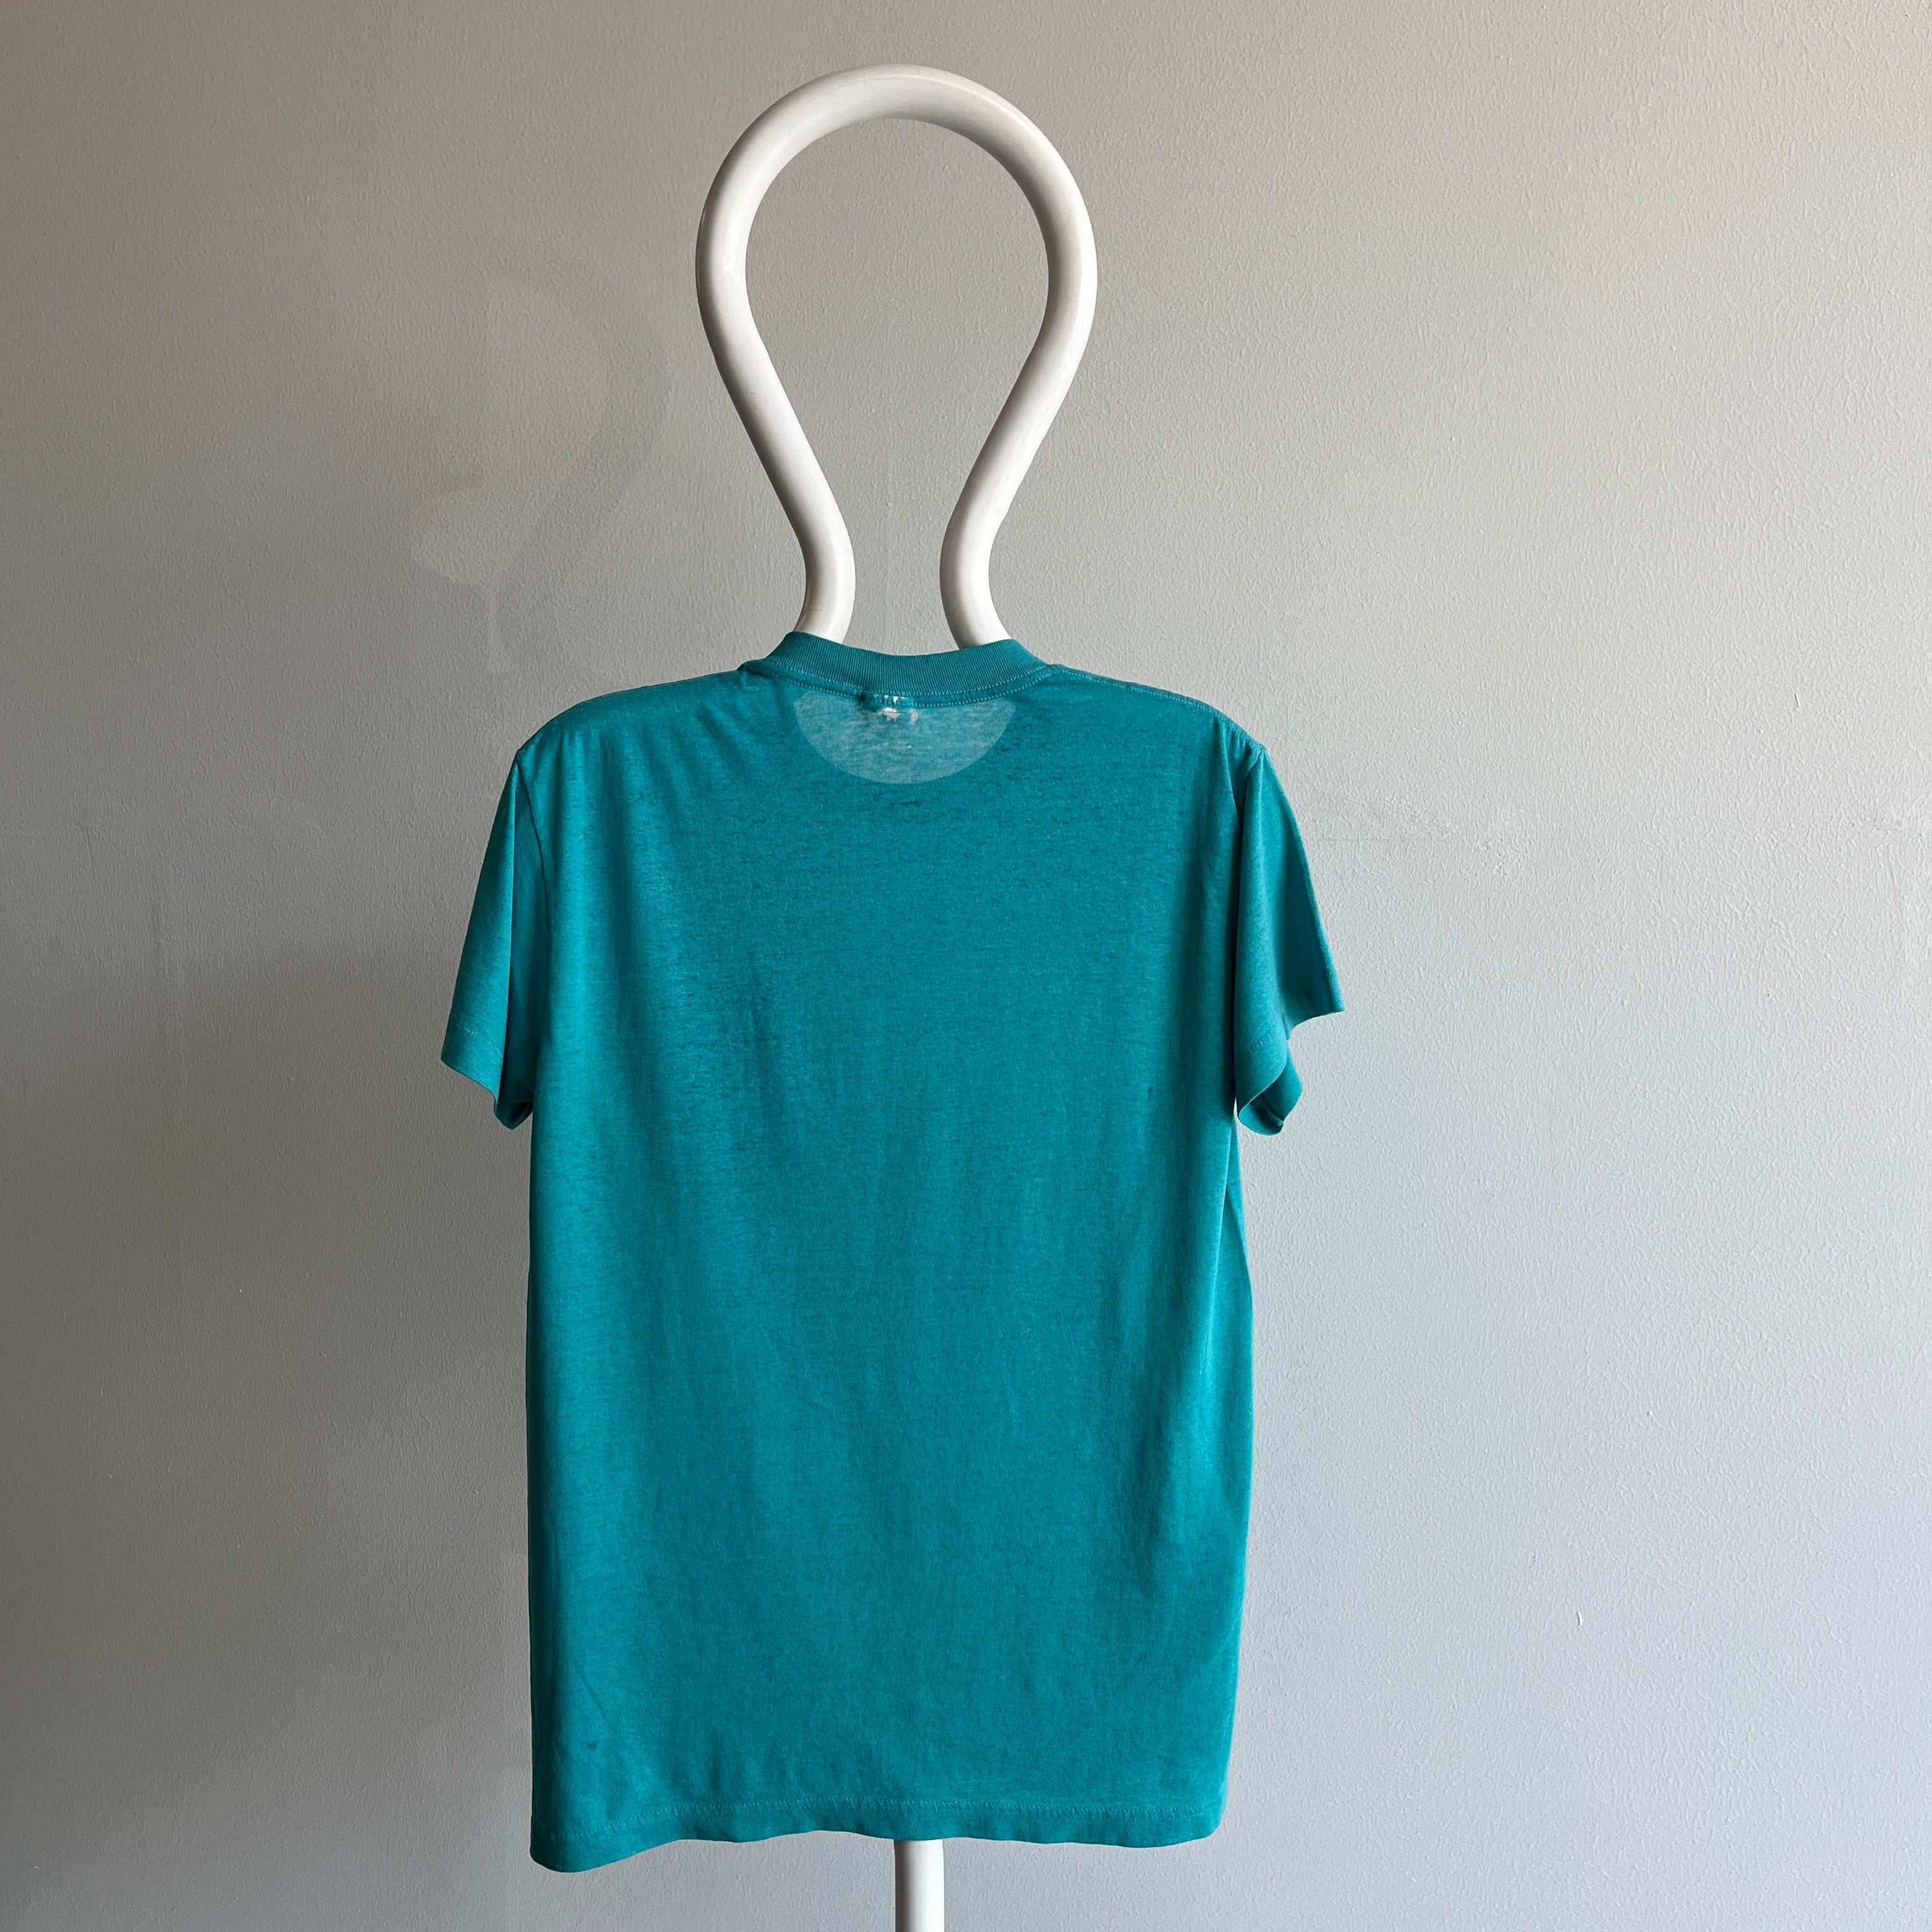 1980s Paper Thin Teal Pocket T-Shirt (the brand)